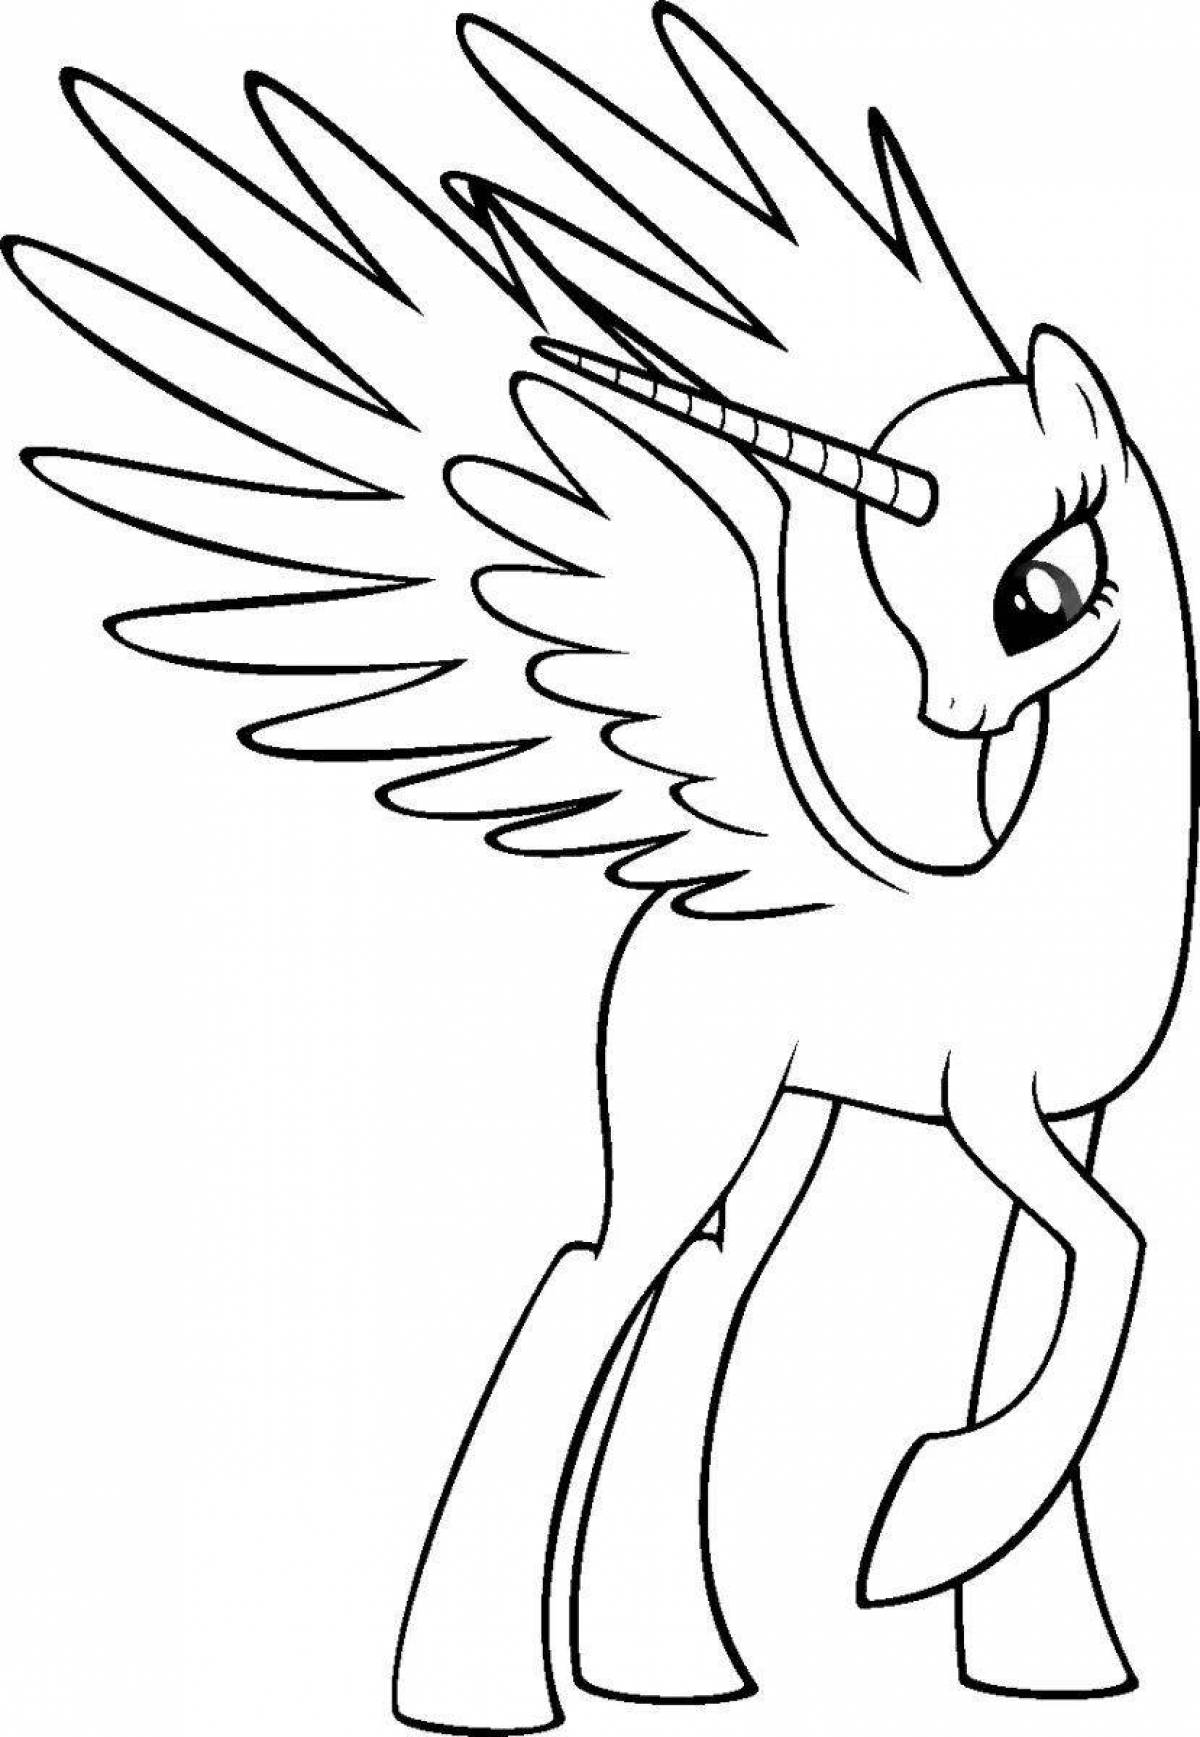 Coloring page playful pony mannequin